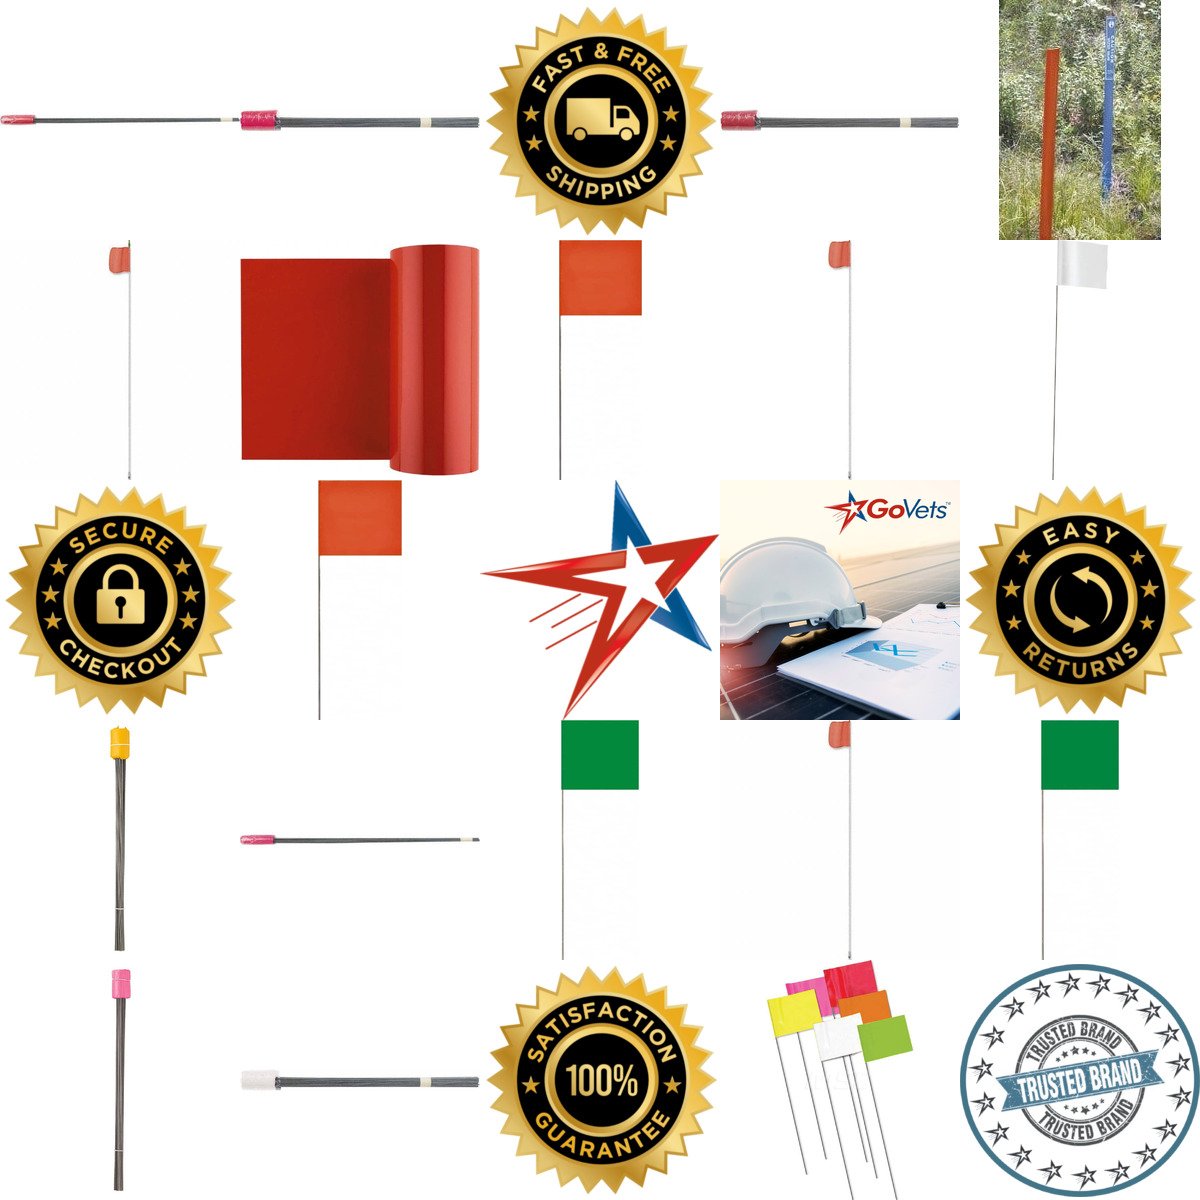 A selection of Marking Flags products on GoVets